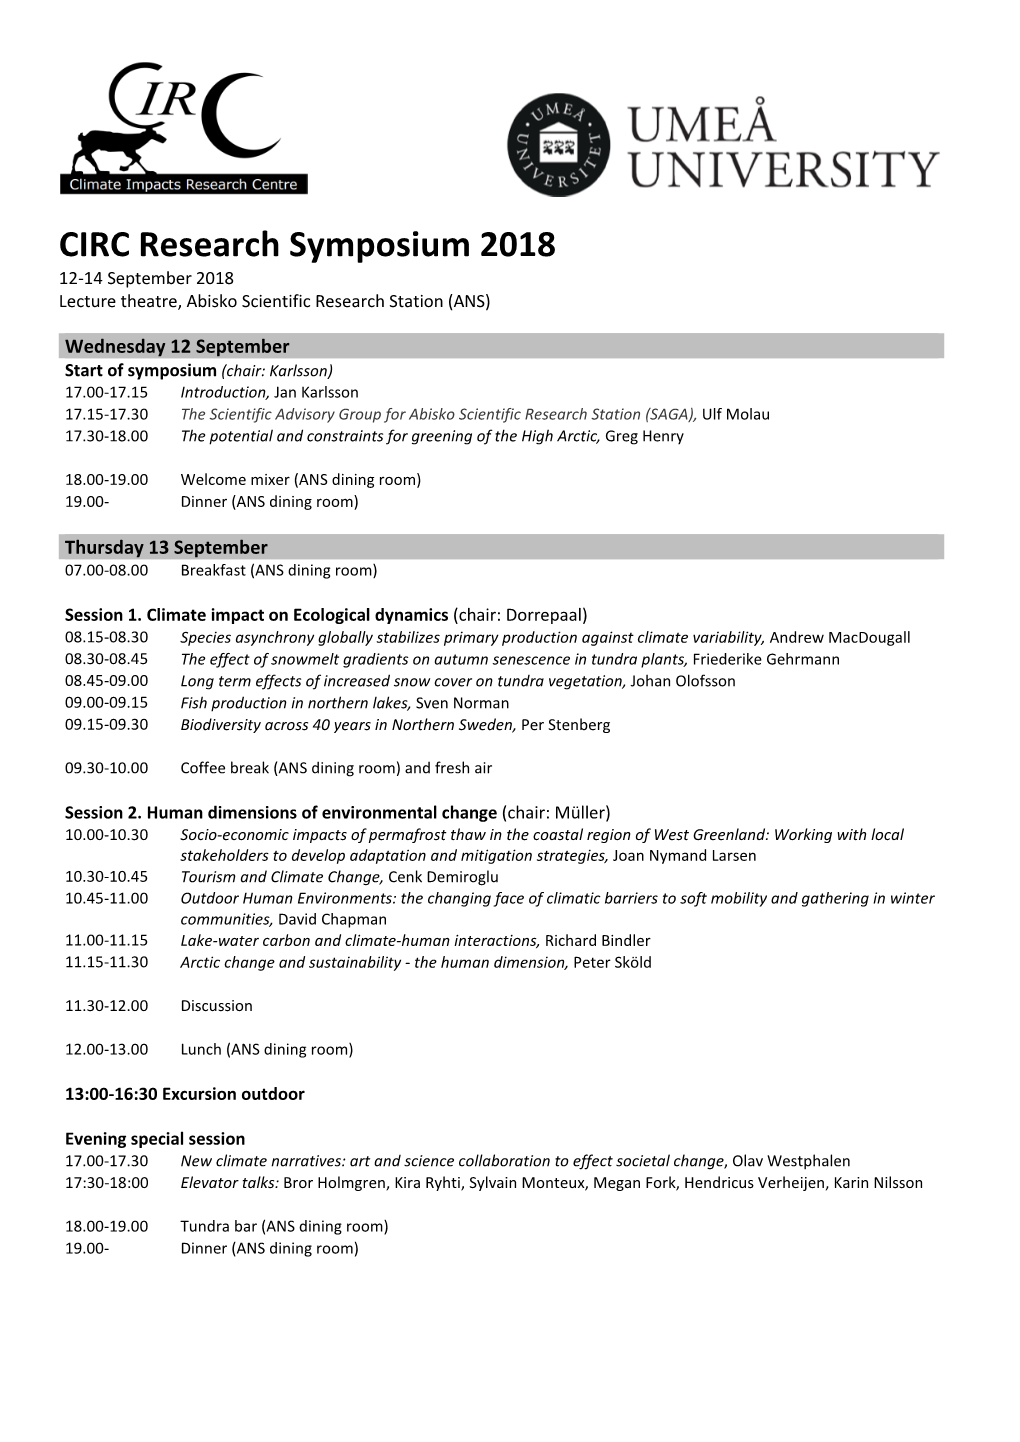 CIRC Research Symposium 2018 12-14 September 2018 Lecture Theatre, Abisko Scientific Research Station (ANS)